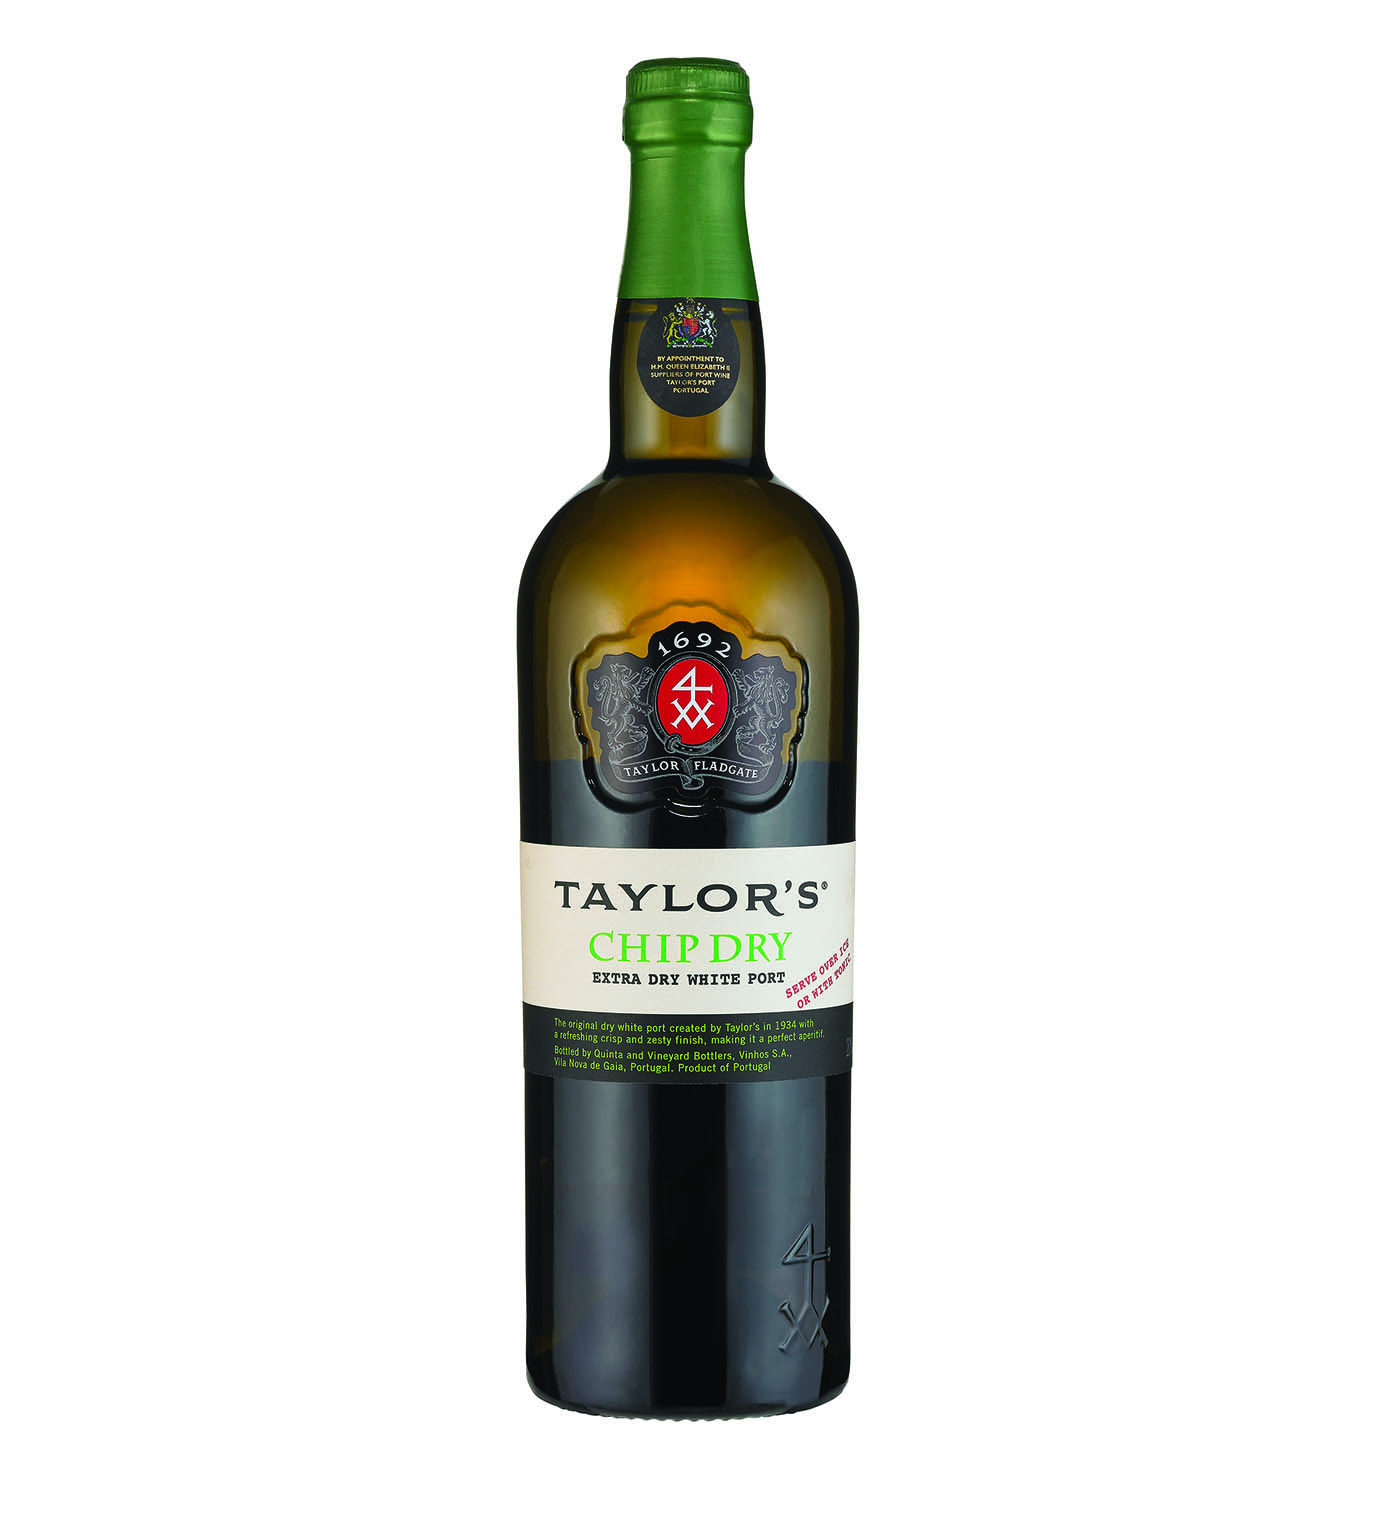 Taylor's Port Chip dry